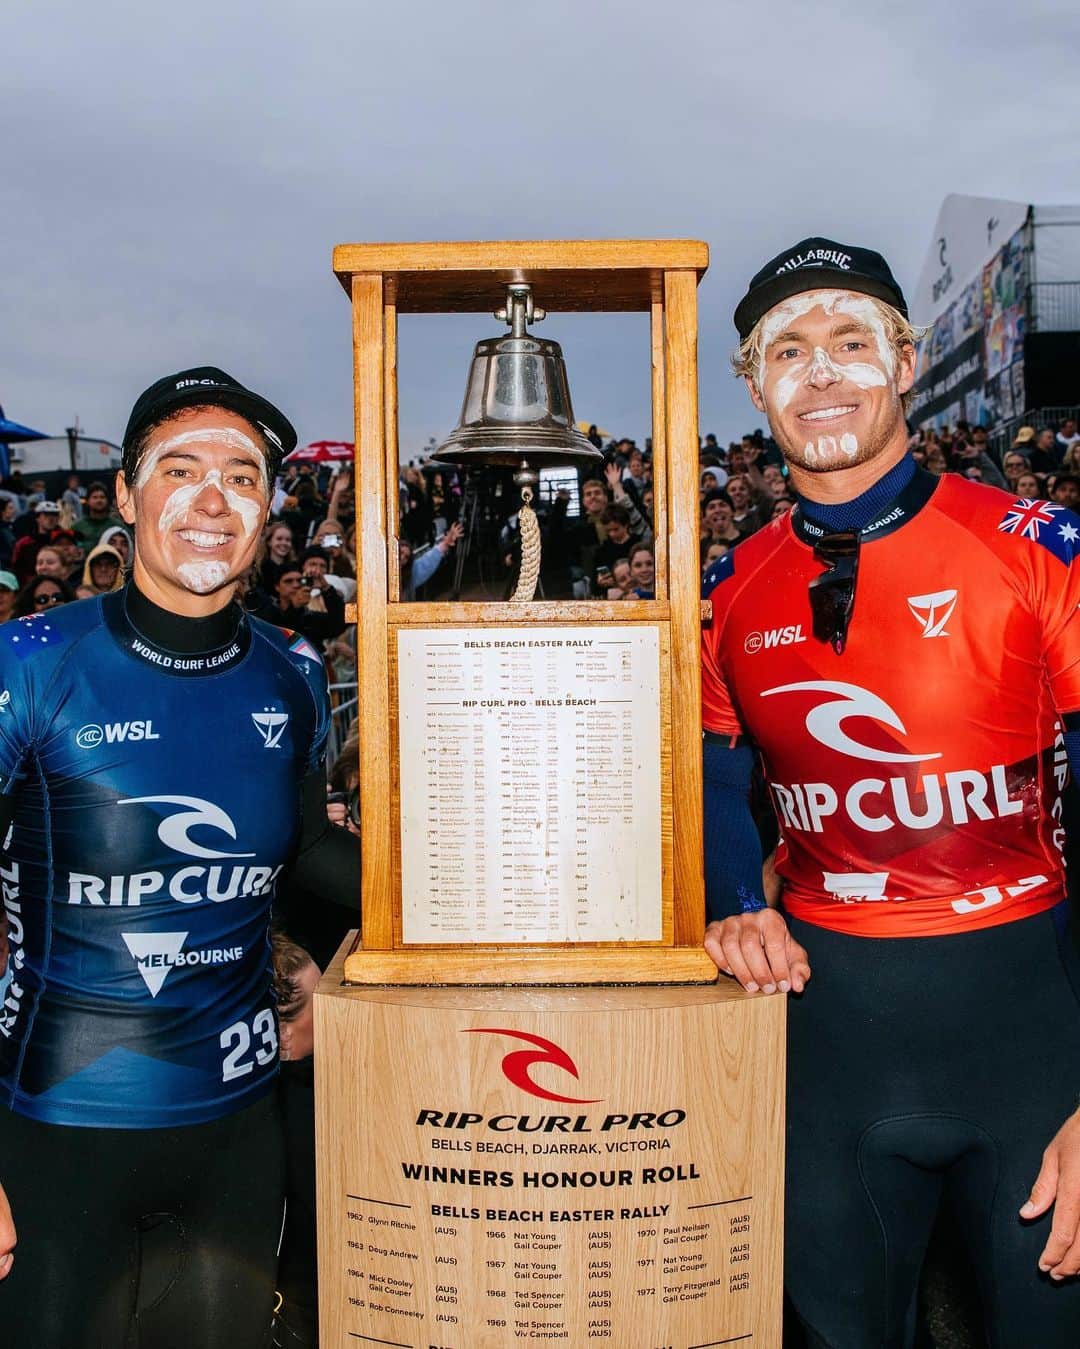 Rip Curl Australiaのインスタグラム：「What a Finals Day at the 2023 #RipCurlPro Bells Beach. 🔔   Huge congratulations to 2x Rip Curl Pro Bells Beach Champion @tylerwright, and to @ethan_ewing for ringing the prestigious Bell for the first time, 40 years after his mother Helen rang it in 83’. 🙌  Runner-ups @picklummolly & @ryancallinan put on an absolute show, congratulations you two!   —  #RipCurl #TylerWright #EthanEwing #BellsBeach #WSL #ChampionshipTour #SurfingCompetition #RipCurlProBellsBeach」